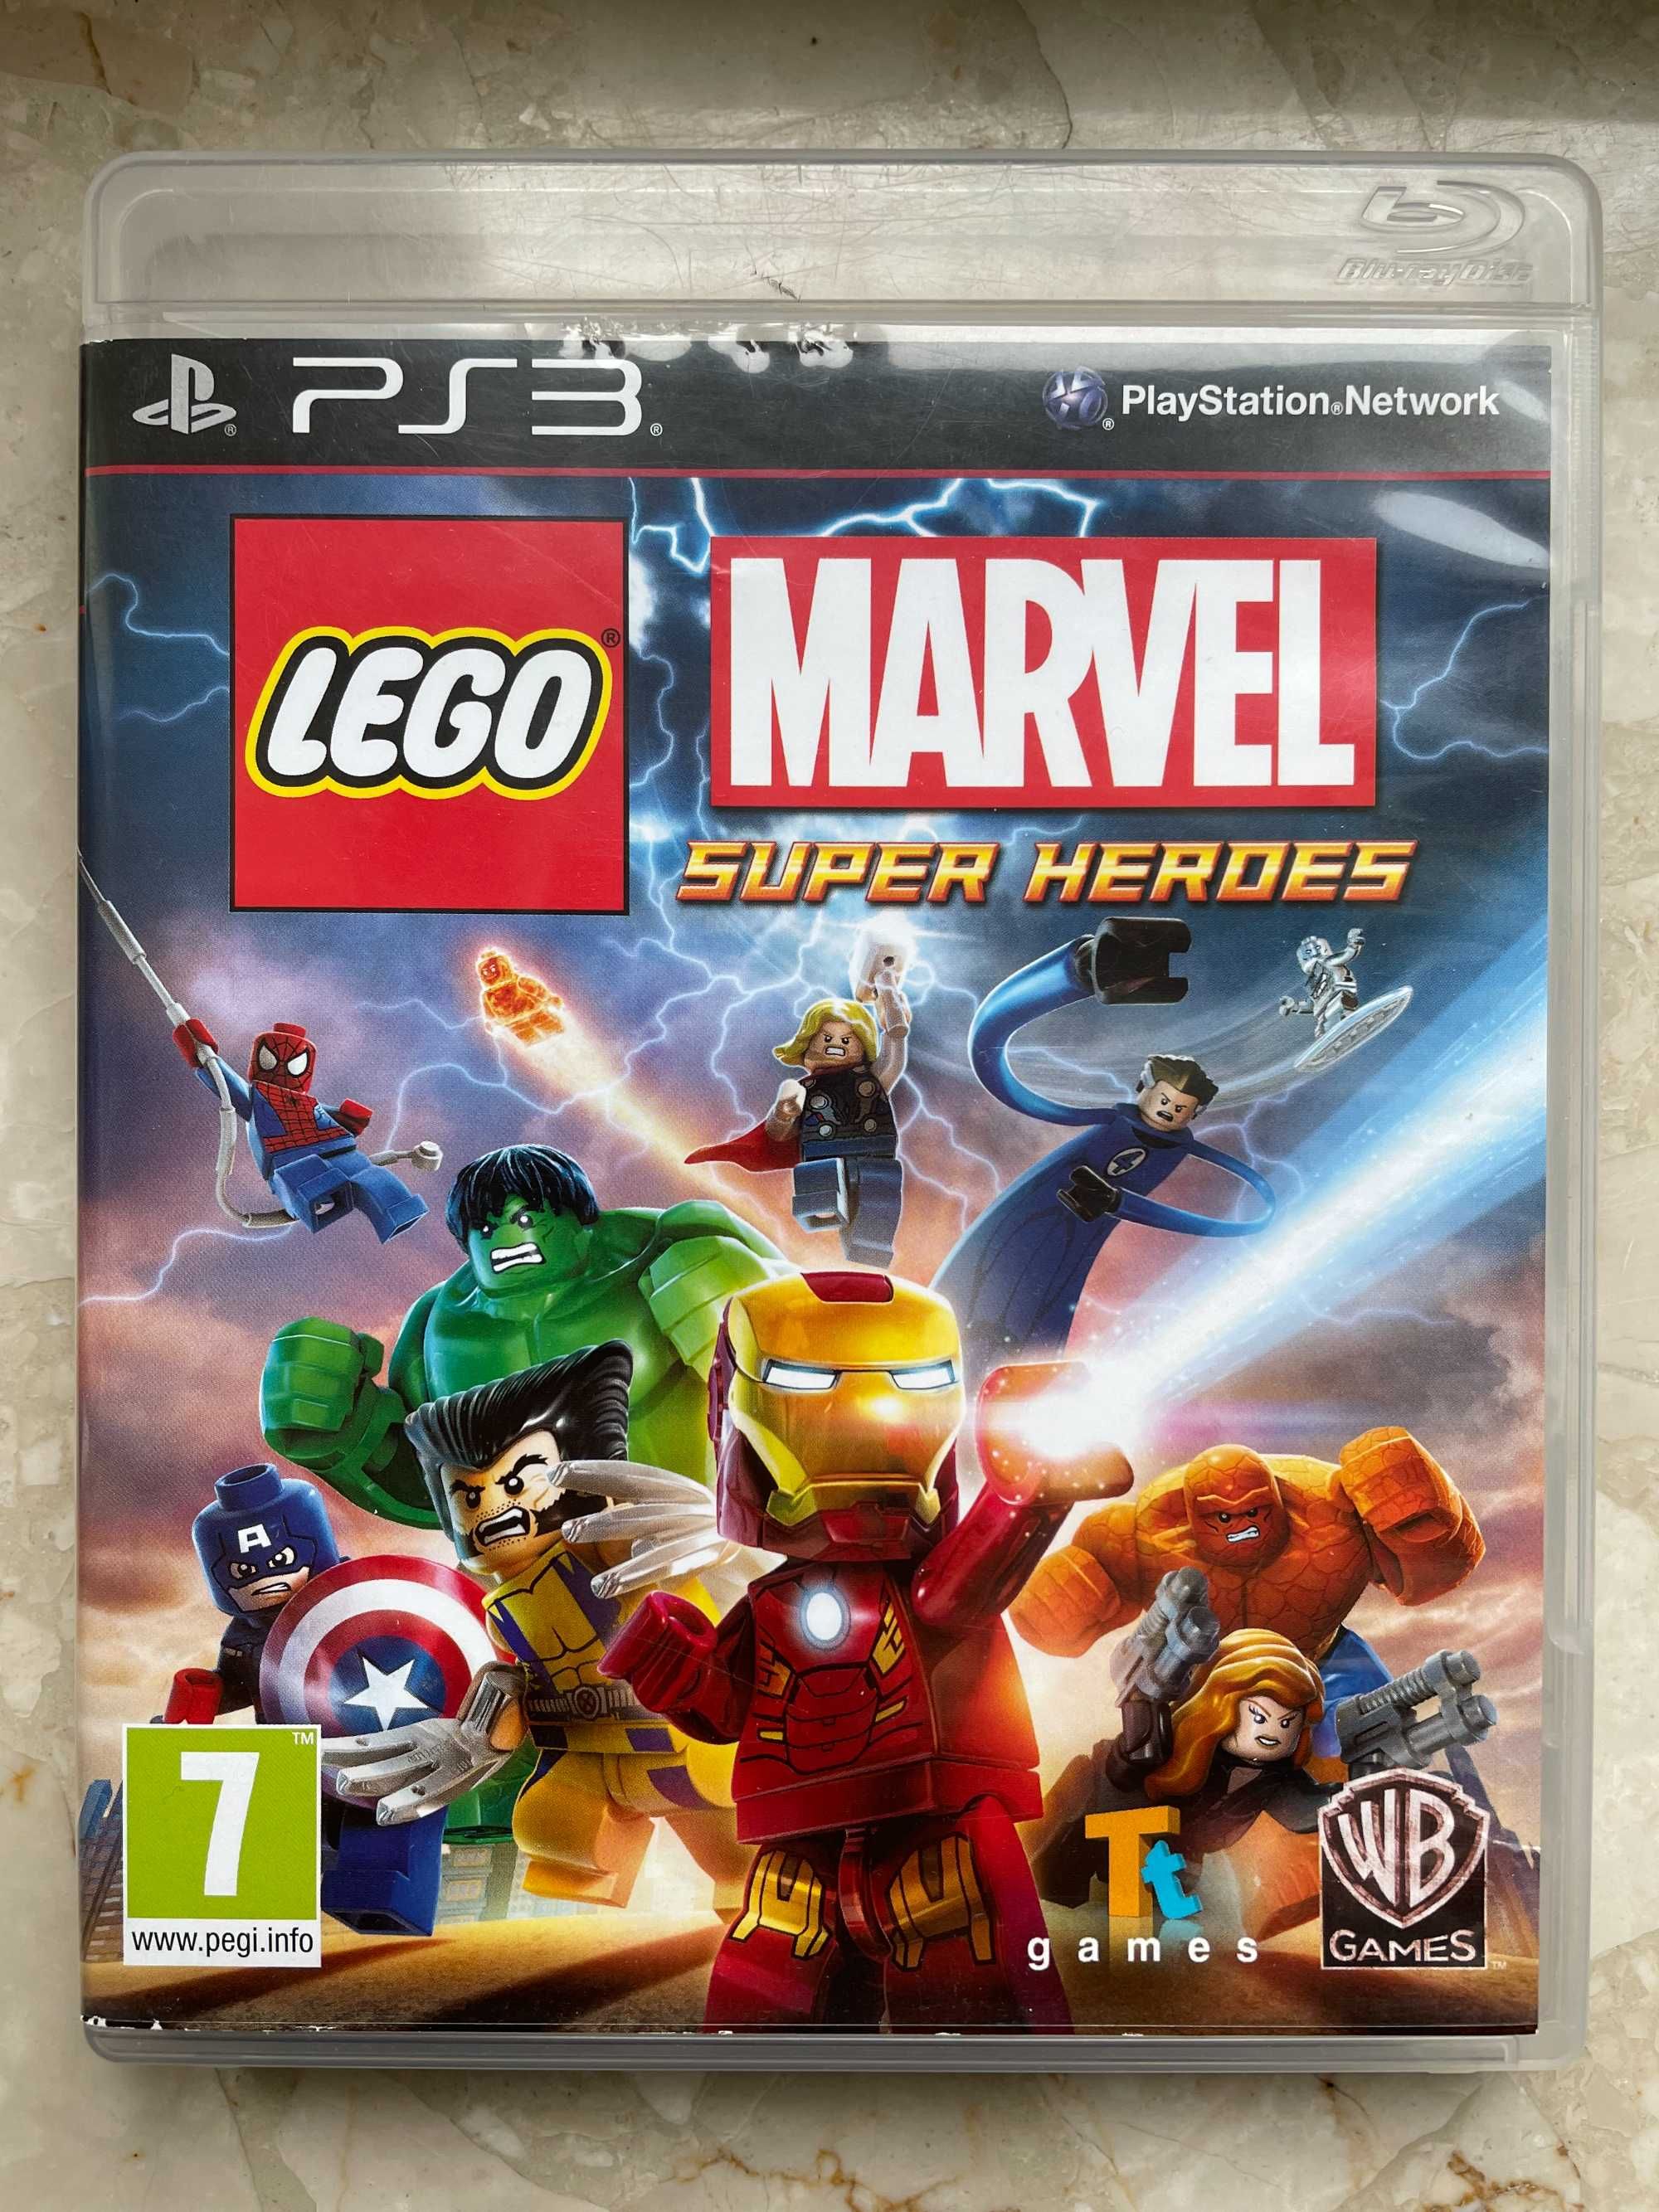 PS4 - Gra "LEGO MARVEL Super Heroes" - Play Station PS4